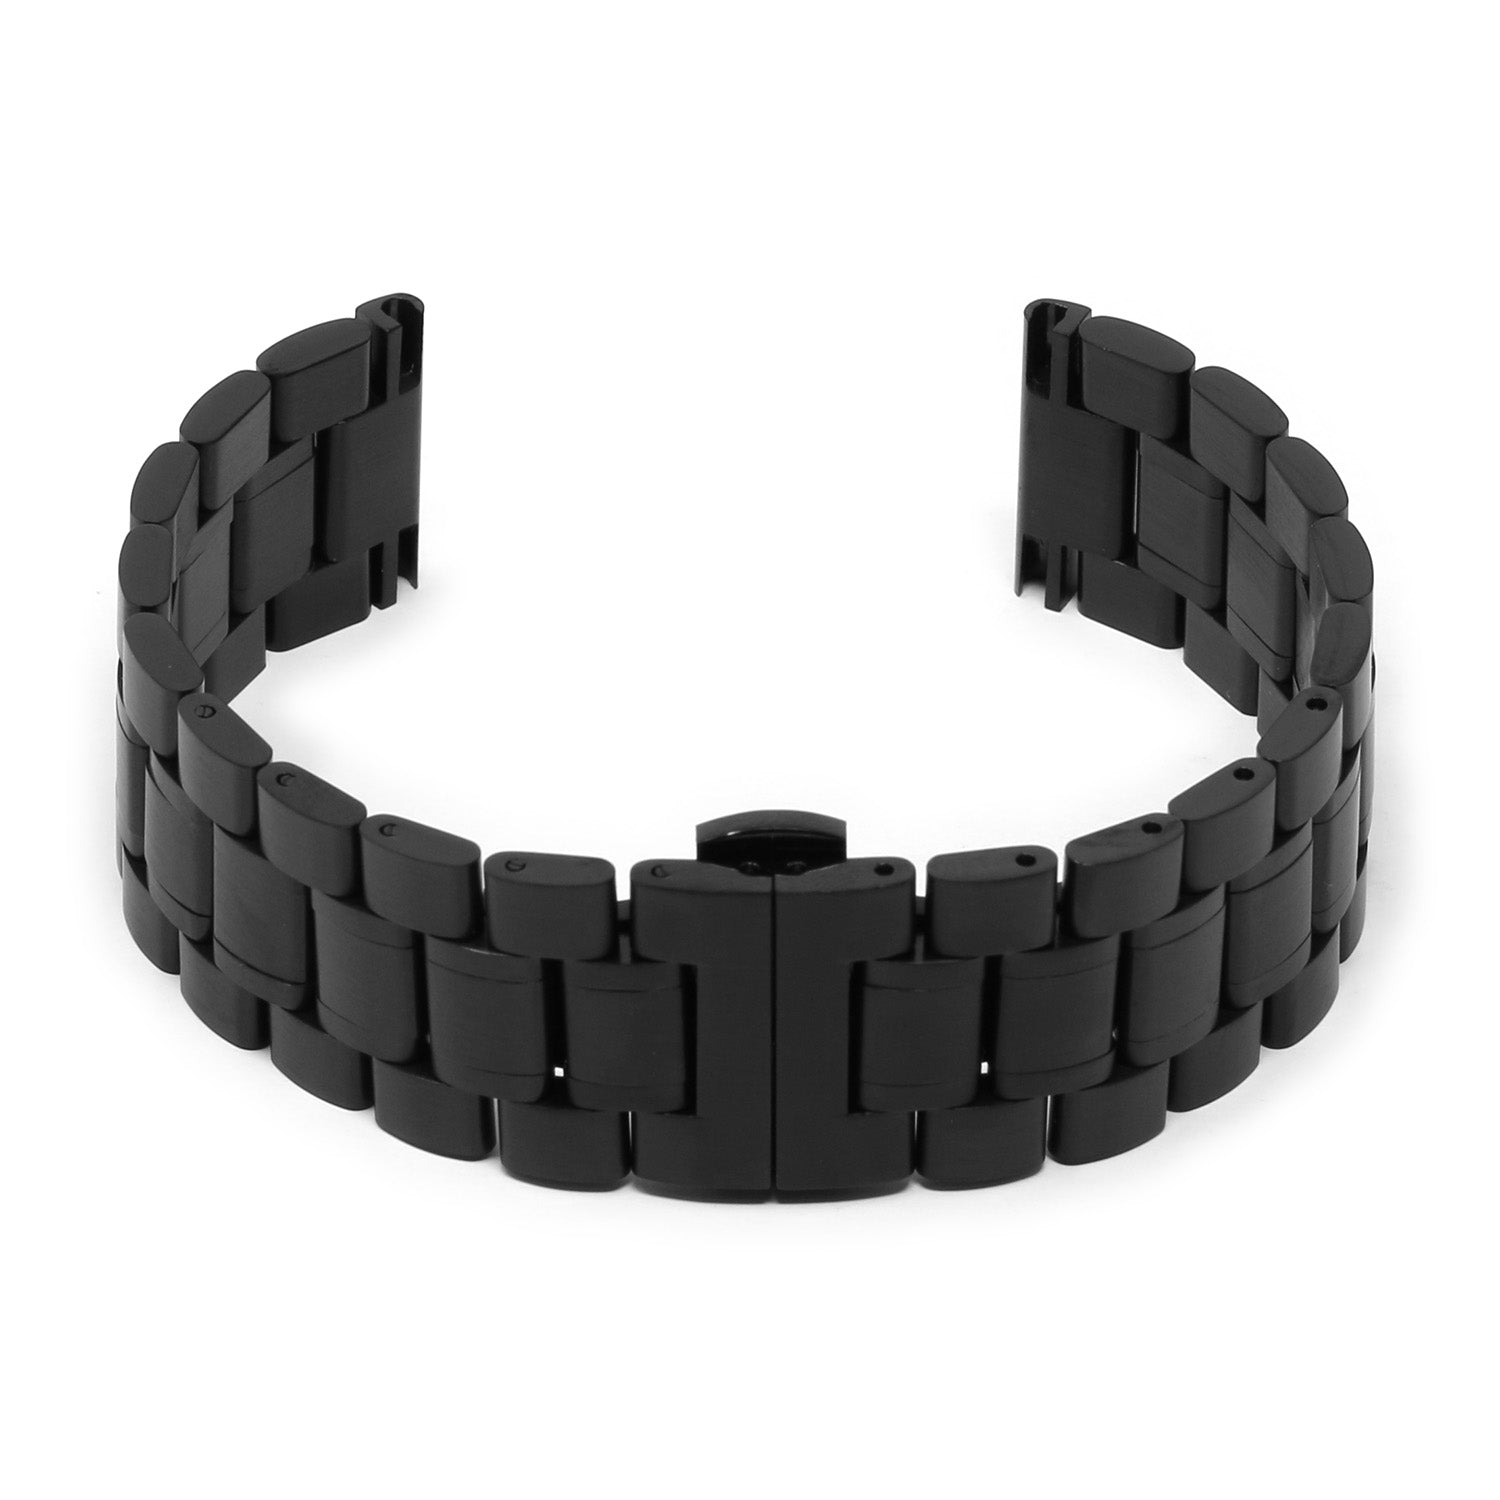 m13.mb Main Black StrapsCo Stainless Steel Metal Quick Release Watch Band Strap